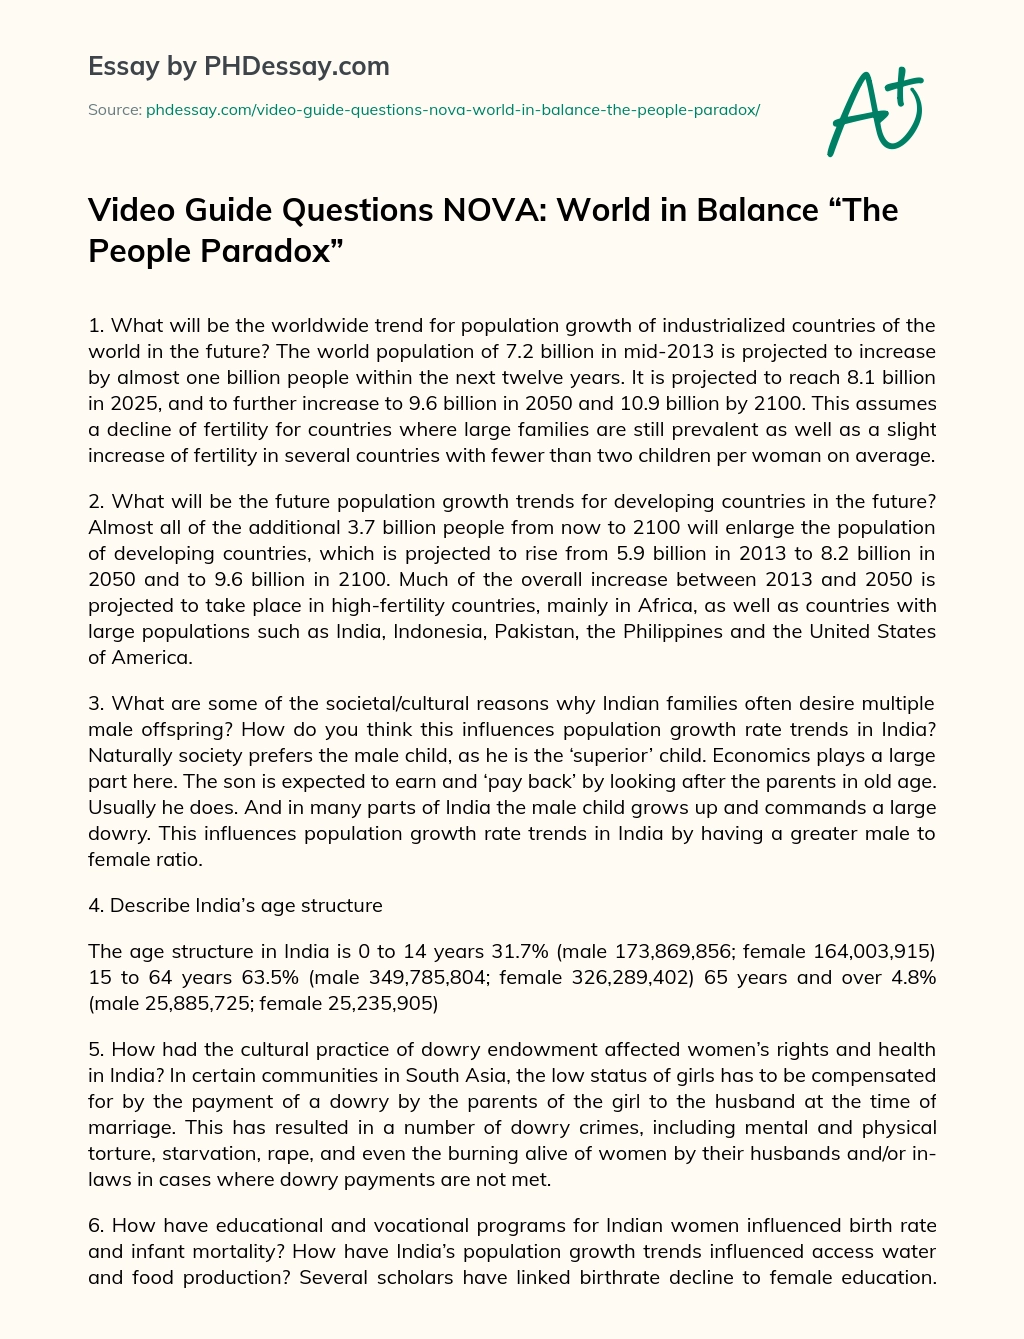 ﻿Video Guide Questions NOVA: World in Balance “The People Paradox” essay